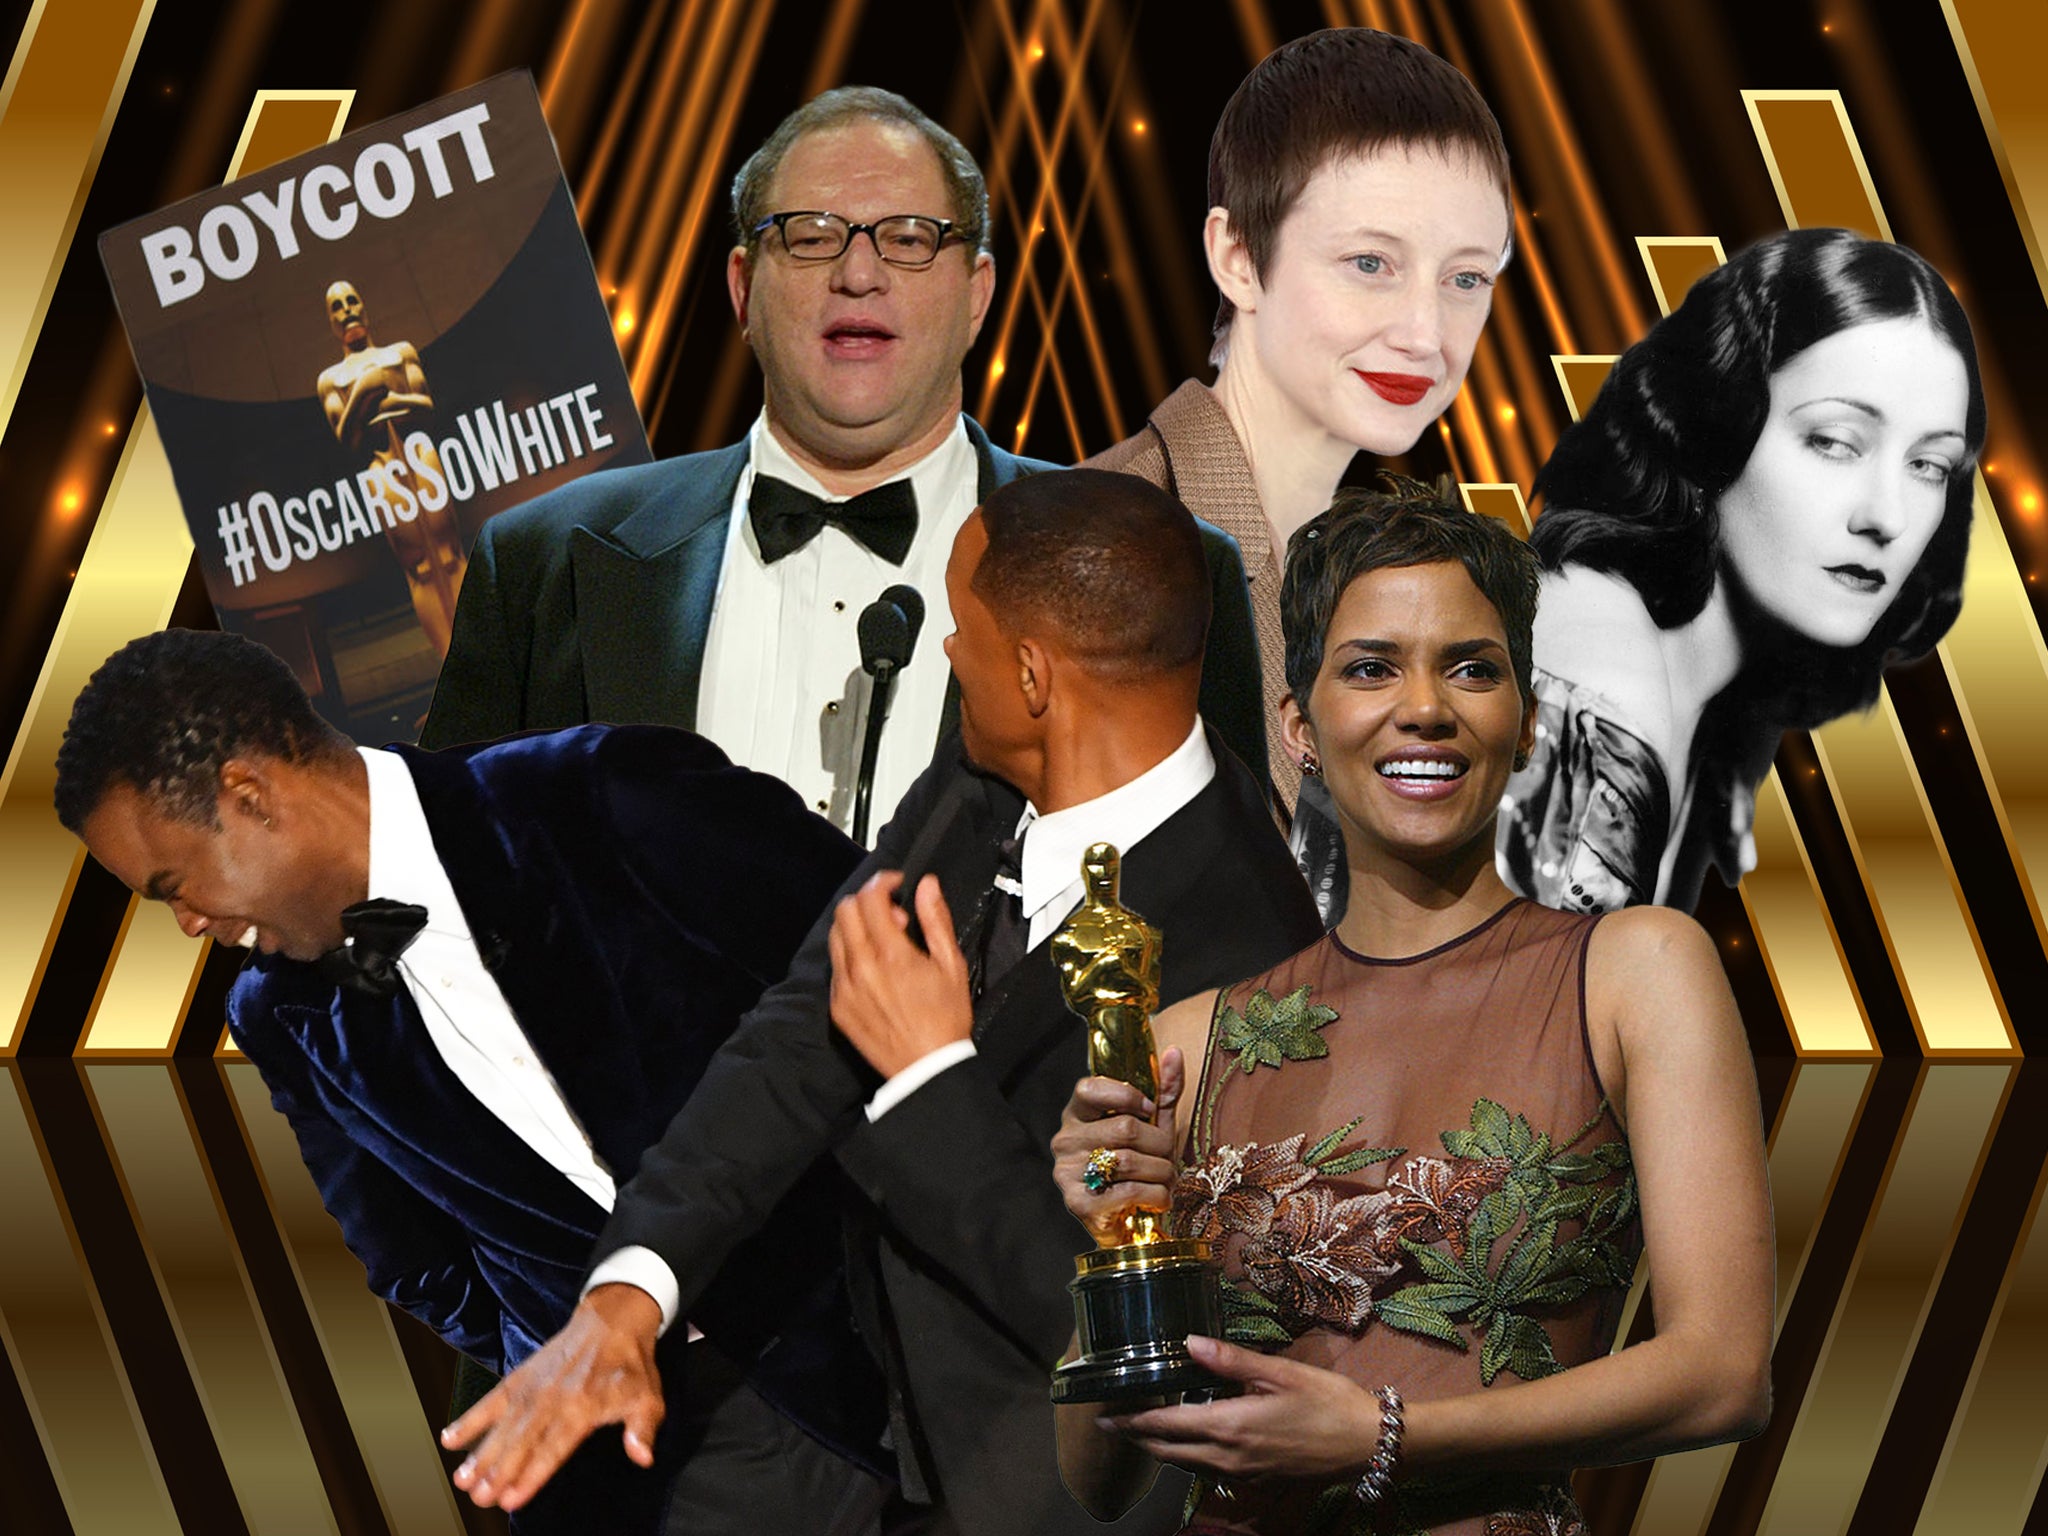 Scandal sheet: Oscar controversies through the years, from Harvey Weinstein to #OscarsSoWhite